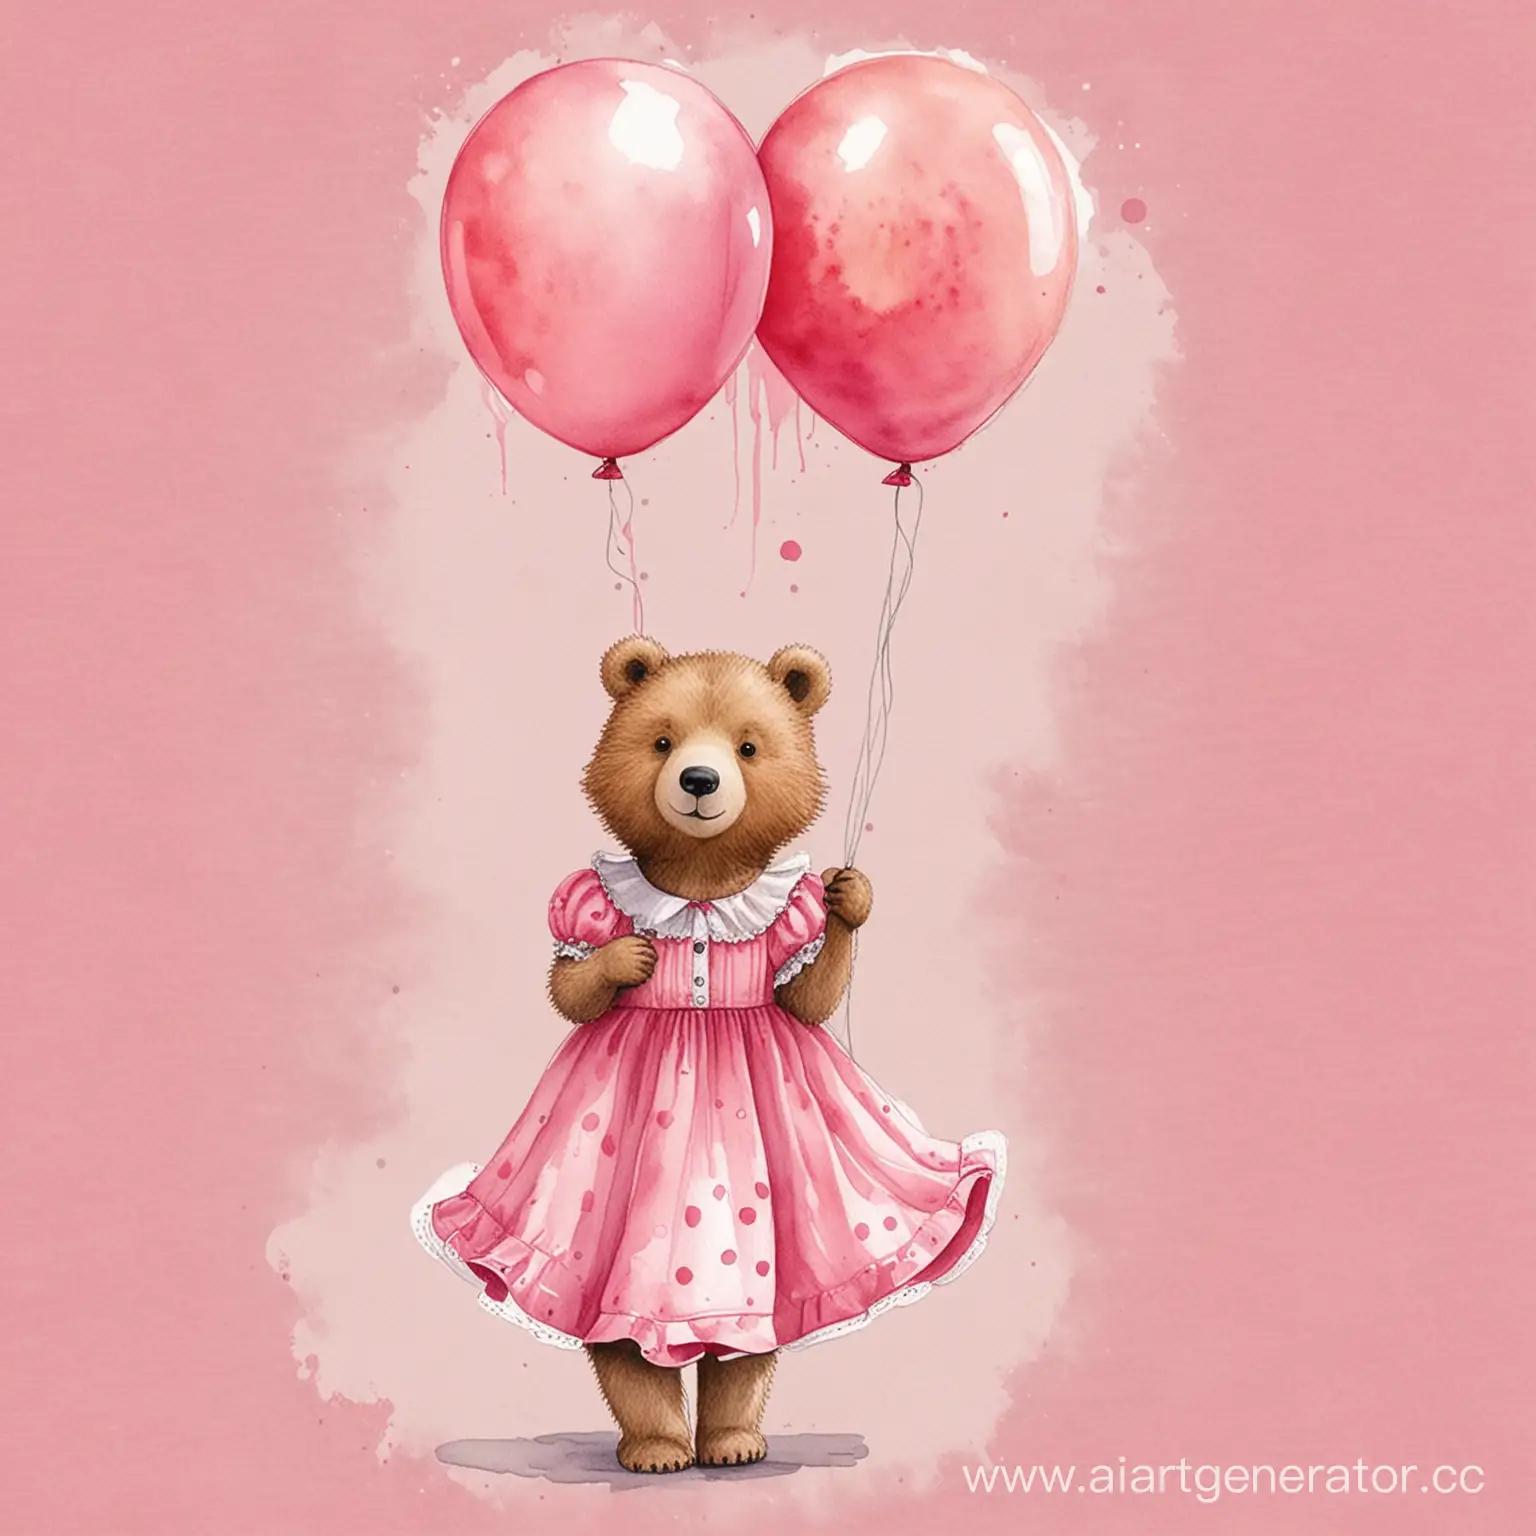 Adorable-Bear-in-Pink-Dress-Holding-Colorful-Balloons-Watercolor-Illustration